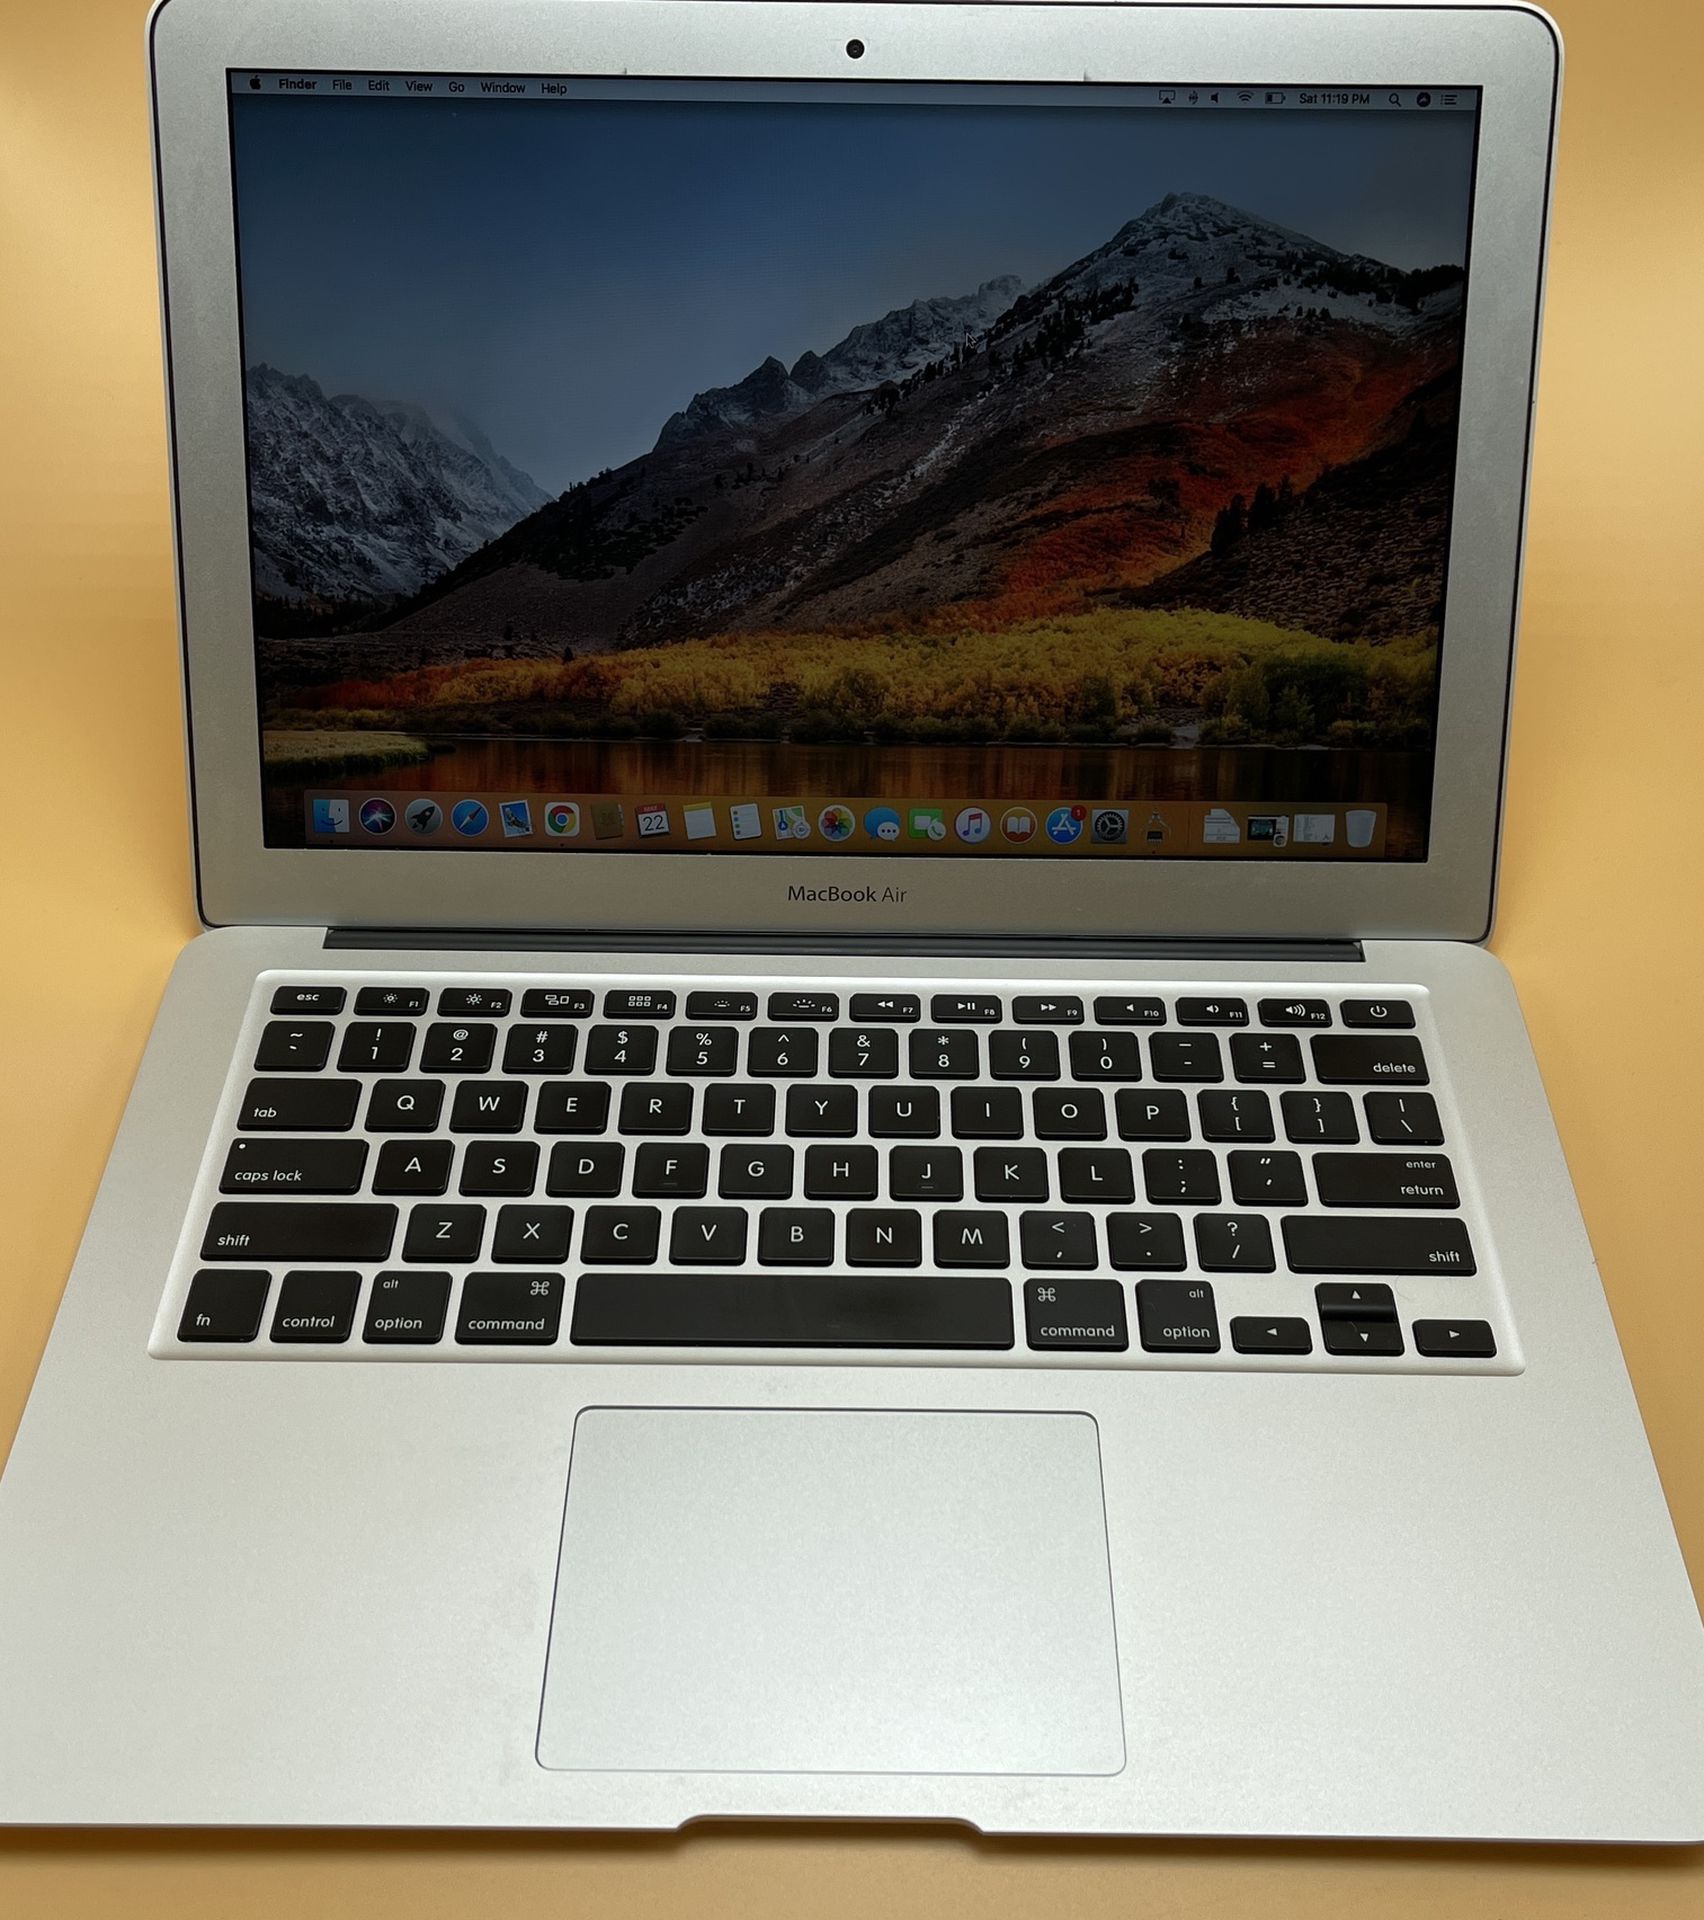 MacBook Air 13’ 2017 i7 2.2Ghz 8GB 256GB Mint Condition for Sale in